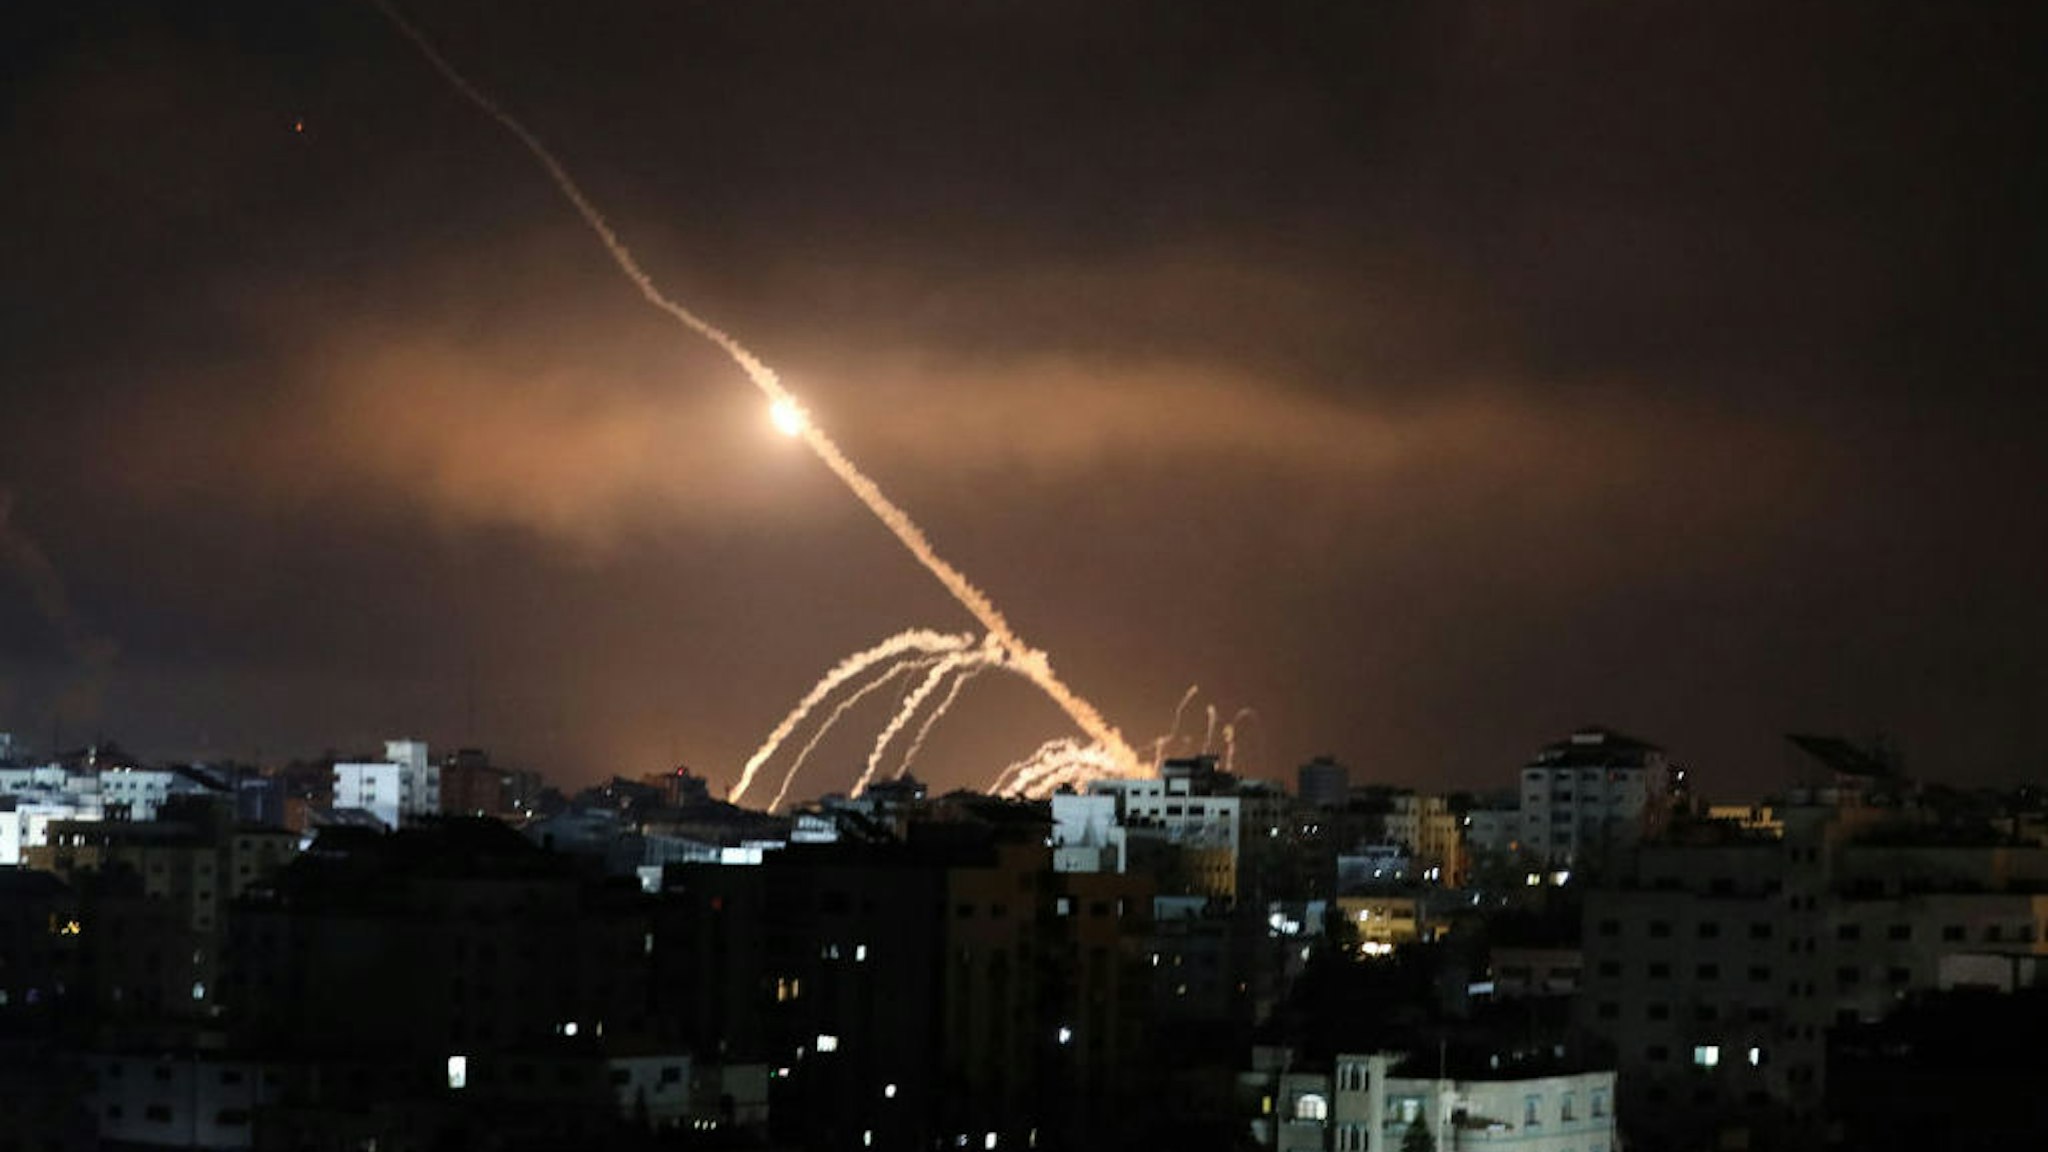 GAZA CITY, GAZA - MAY 15: Rockets are being fired from Gaza targeting Israeli cities in response to Israeli airstrikes on the Gaza Strip, on May 15, 2021. (Photo by Mustafa Hassona/Anadolu Agency via Getty Images)